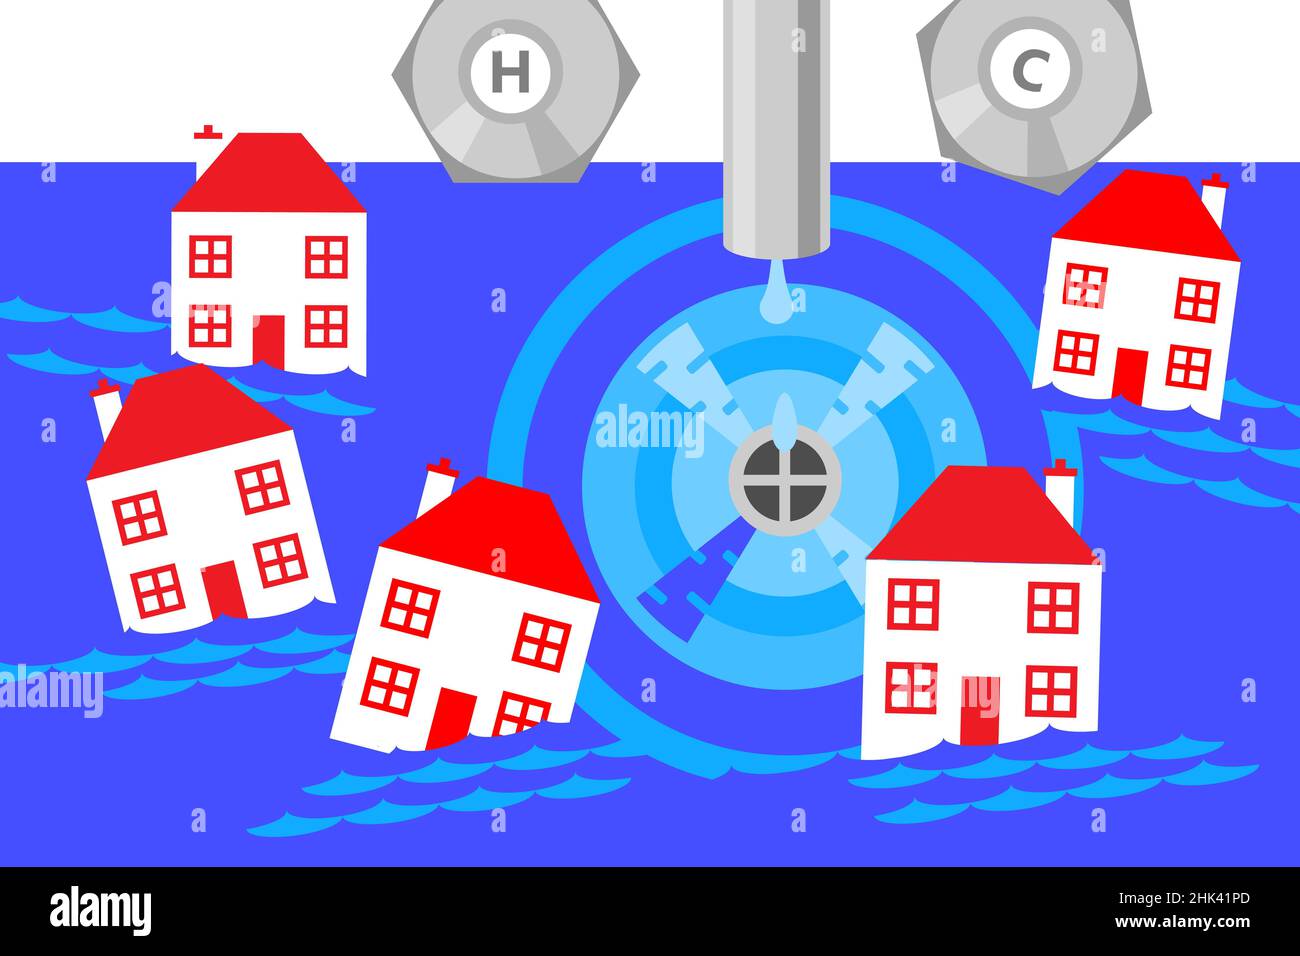 An illustration of a sink being drained and lots of small houses being sucked in to the vortex created by the plug hole. Stock Photo